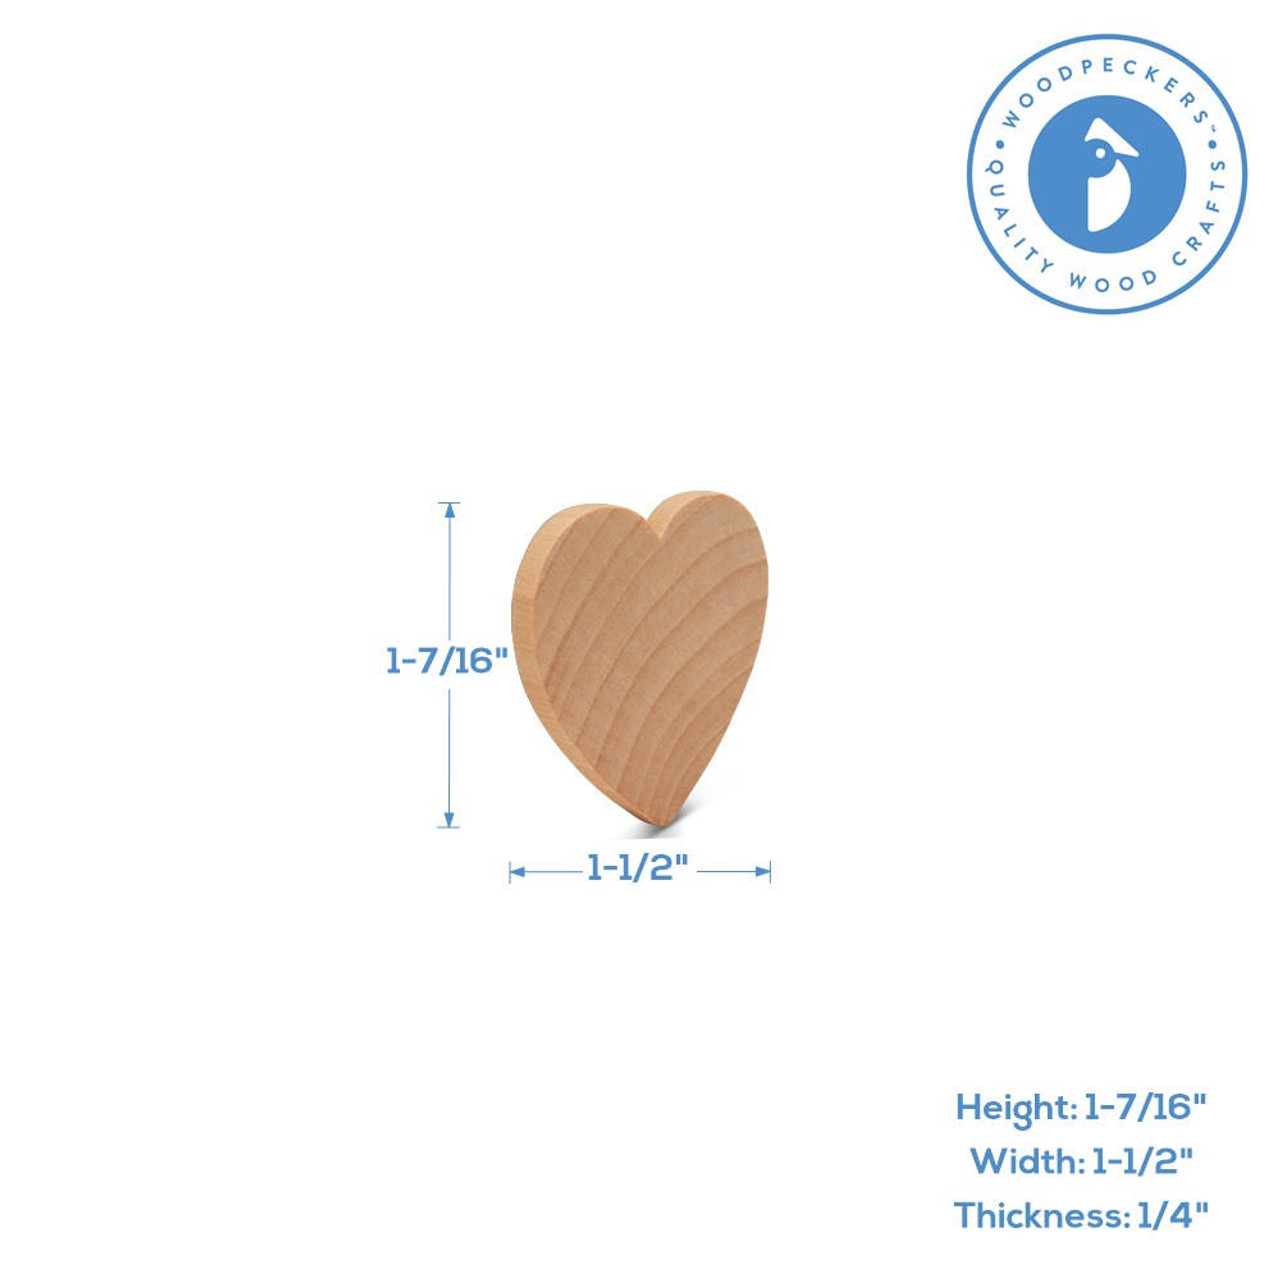 Wooden Heart Cutouts for Crafts 24 inch, 1/4 inch Thick, Pack of 10 Unfinished Heart Shaped Wooden Cutouts, by Woodpeckers